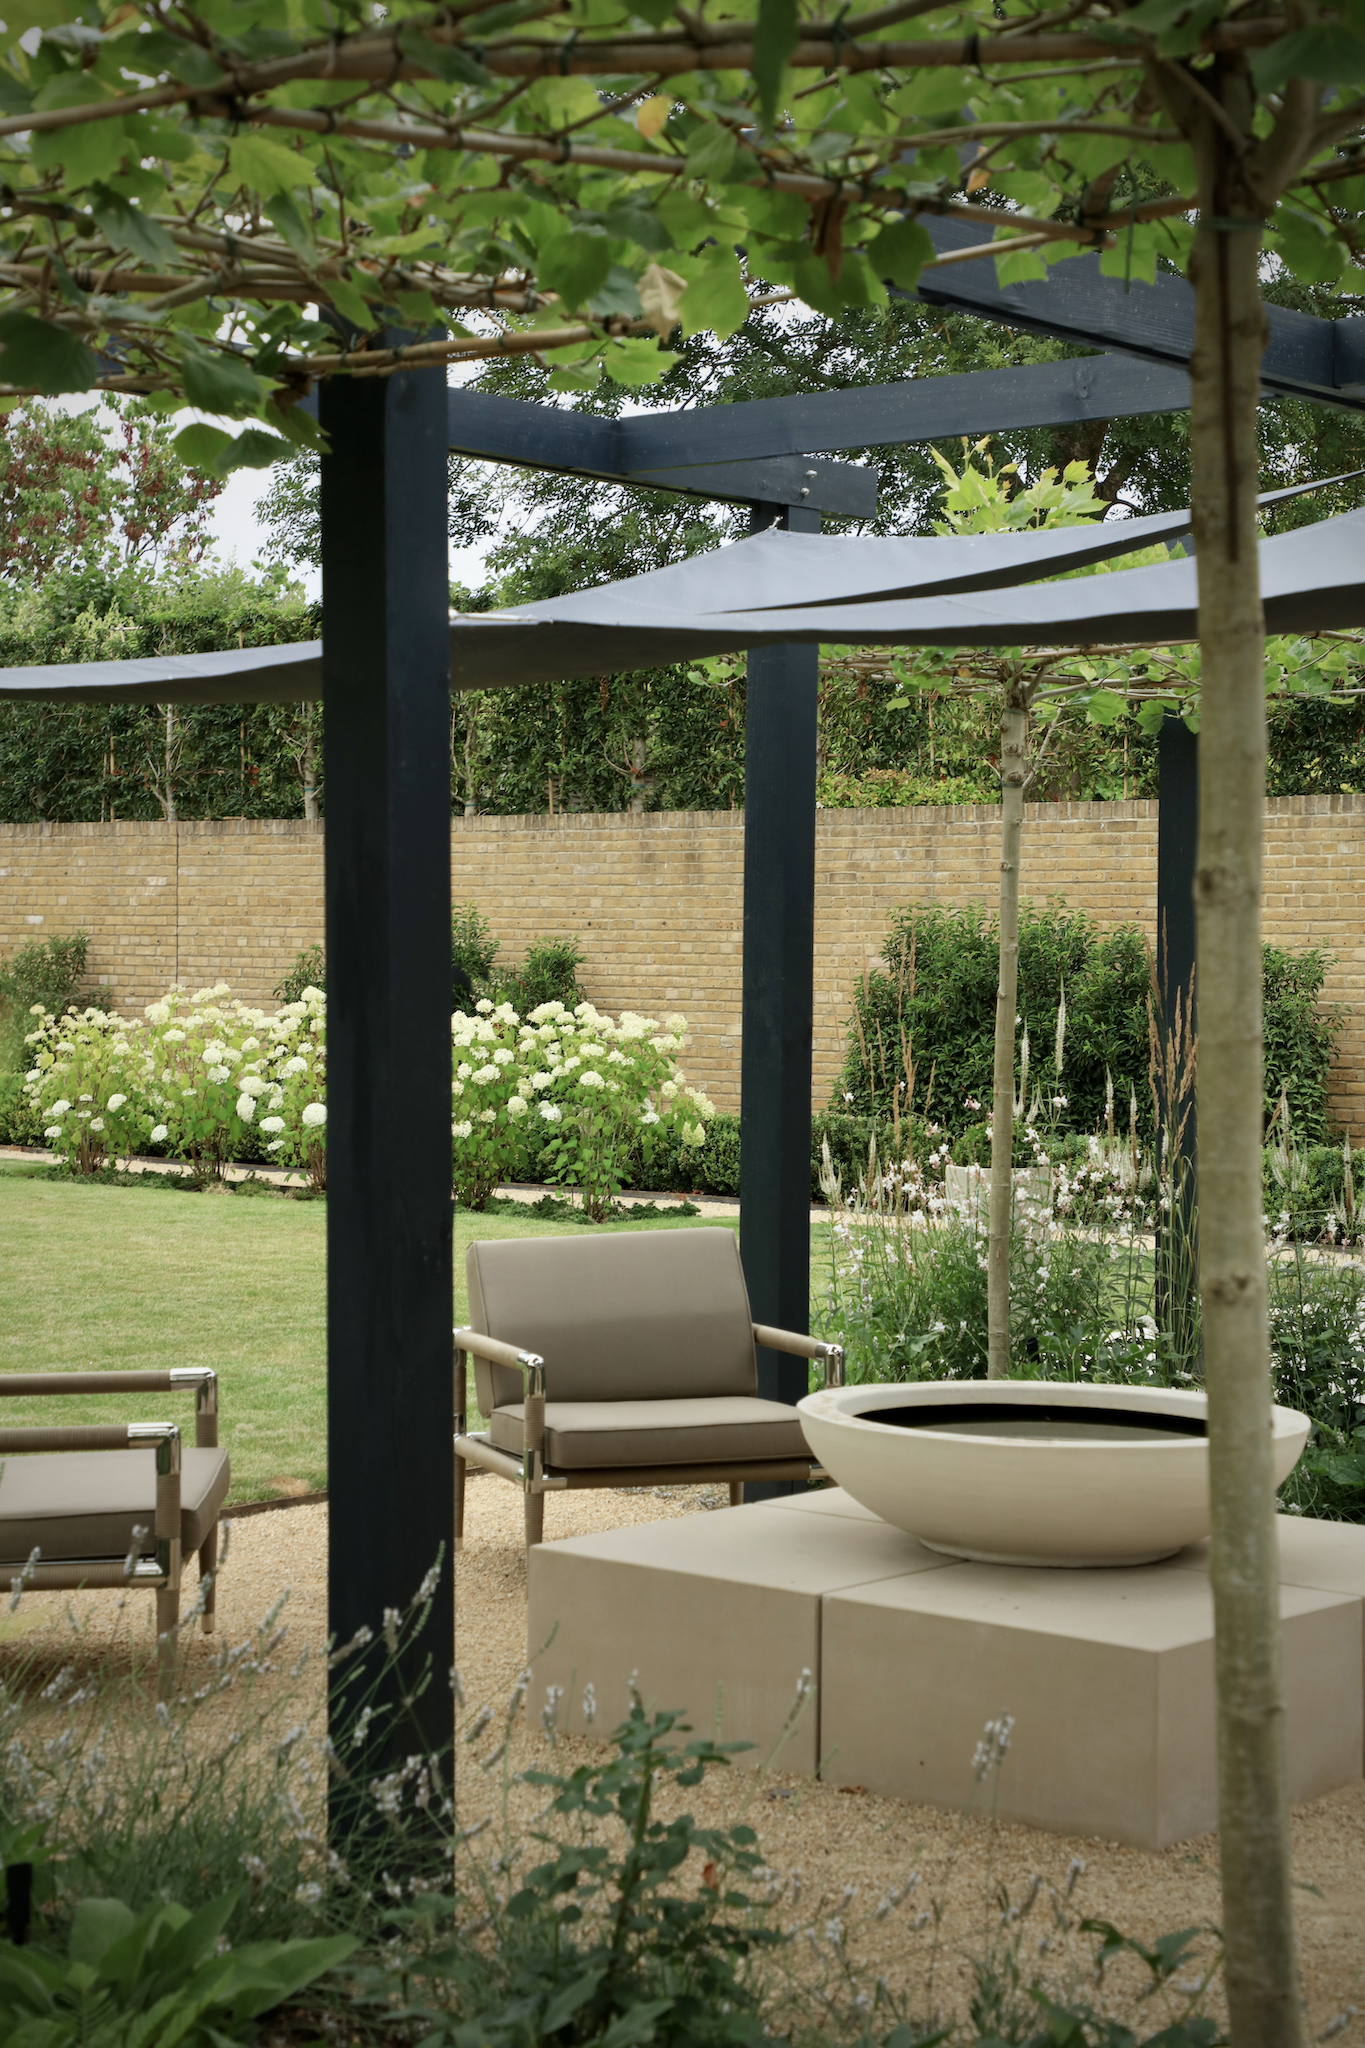 Pleached trees through the arbor looking on to realxed seating area with waterbowl and indian ocean furniture